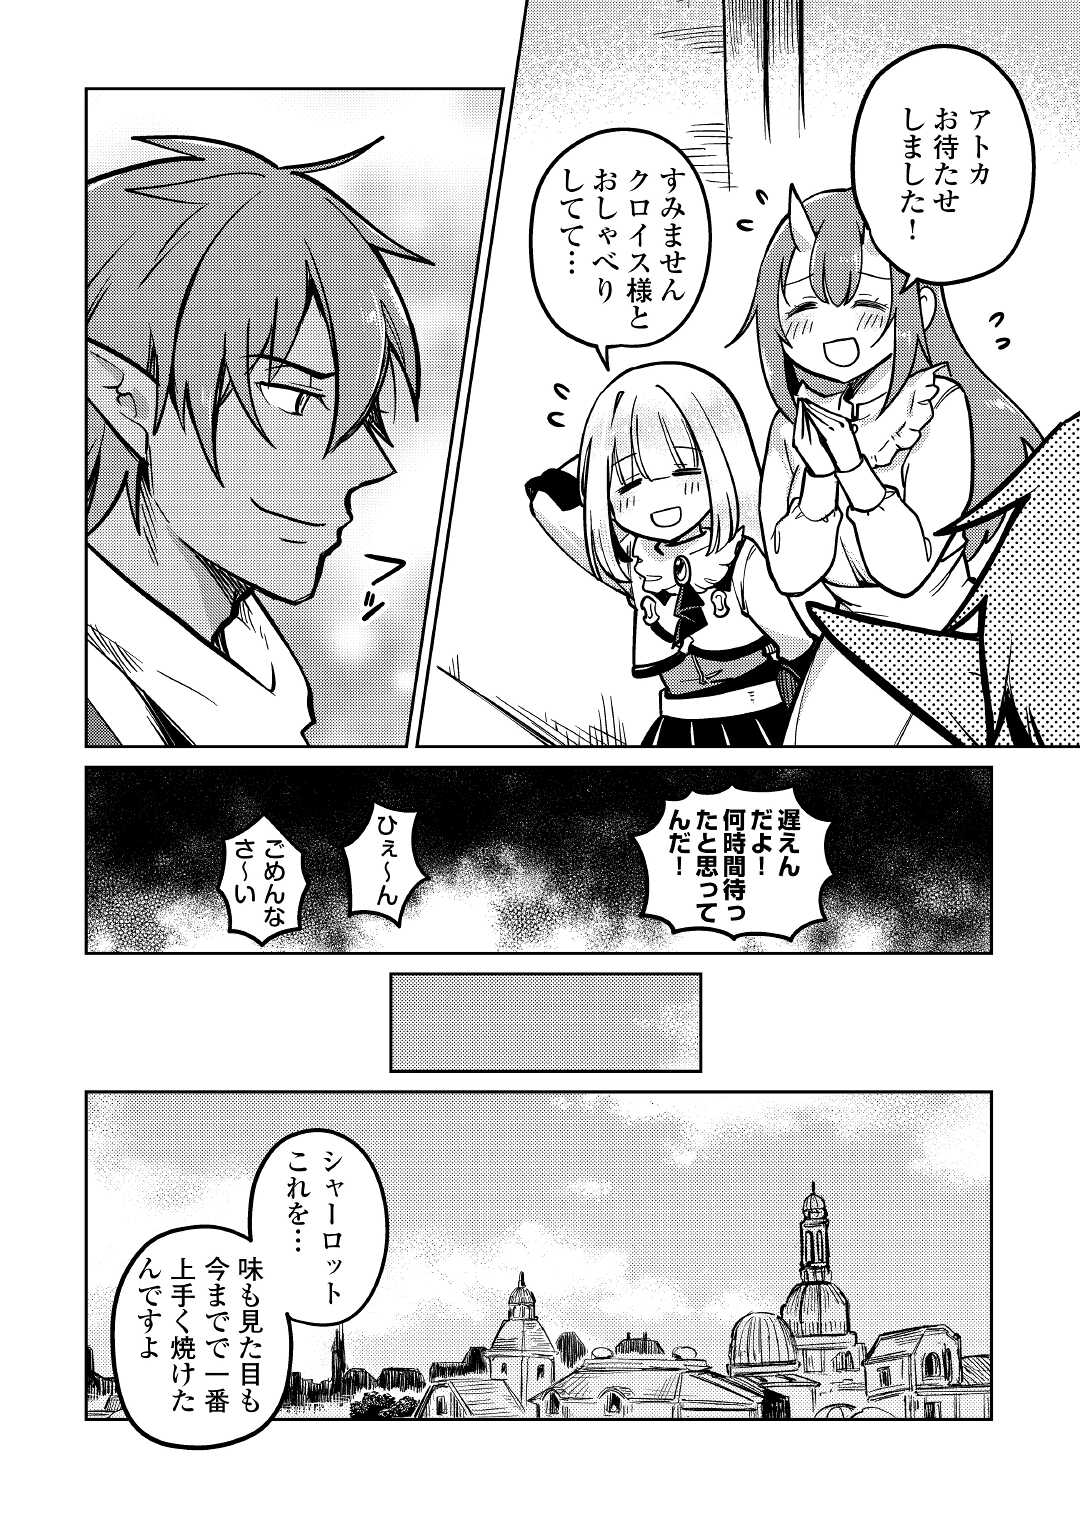 The Former Structural Researcher’s Story of Otherworldly Adventure 第41話 - Page 14